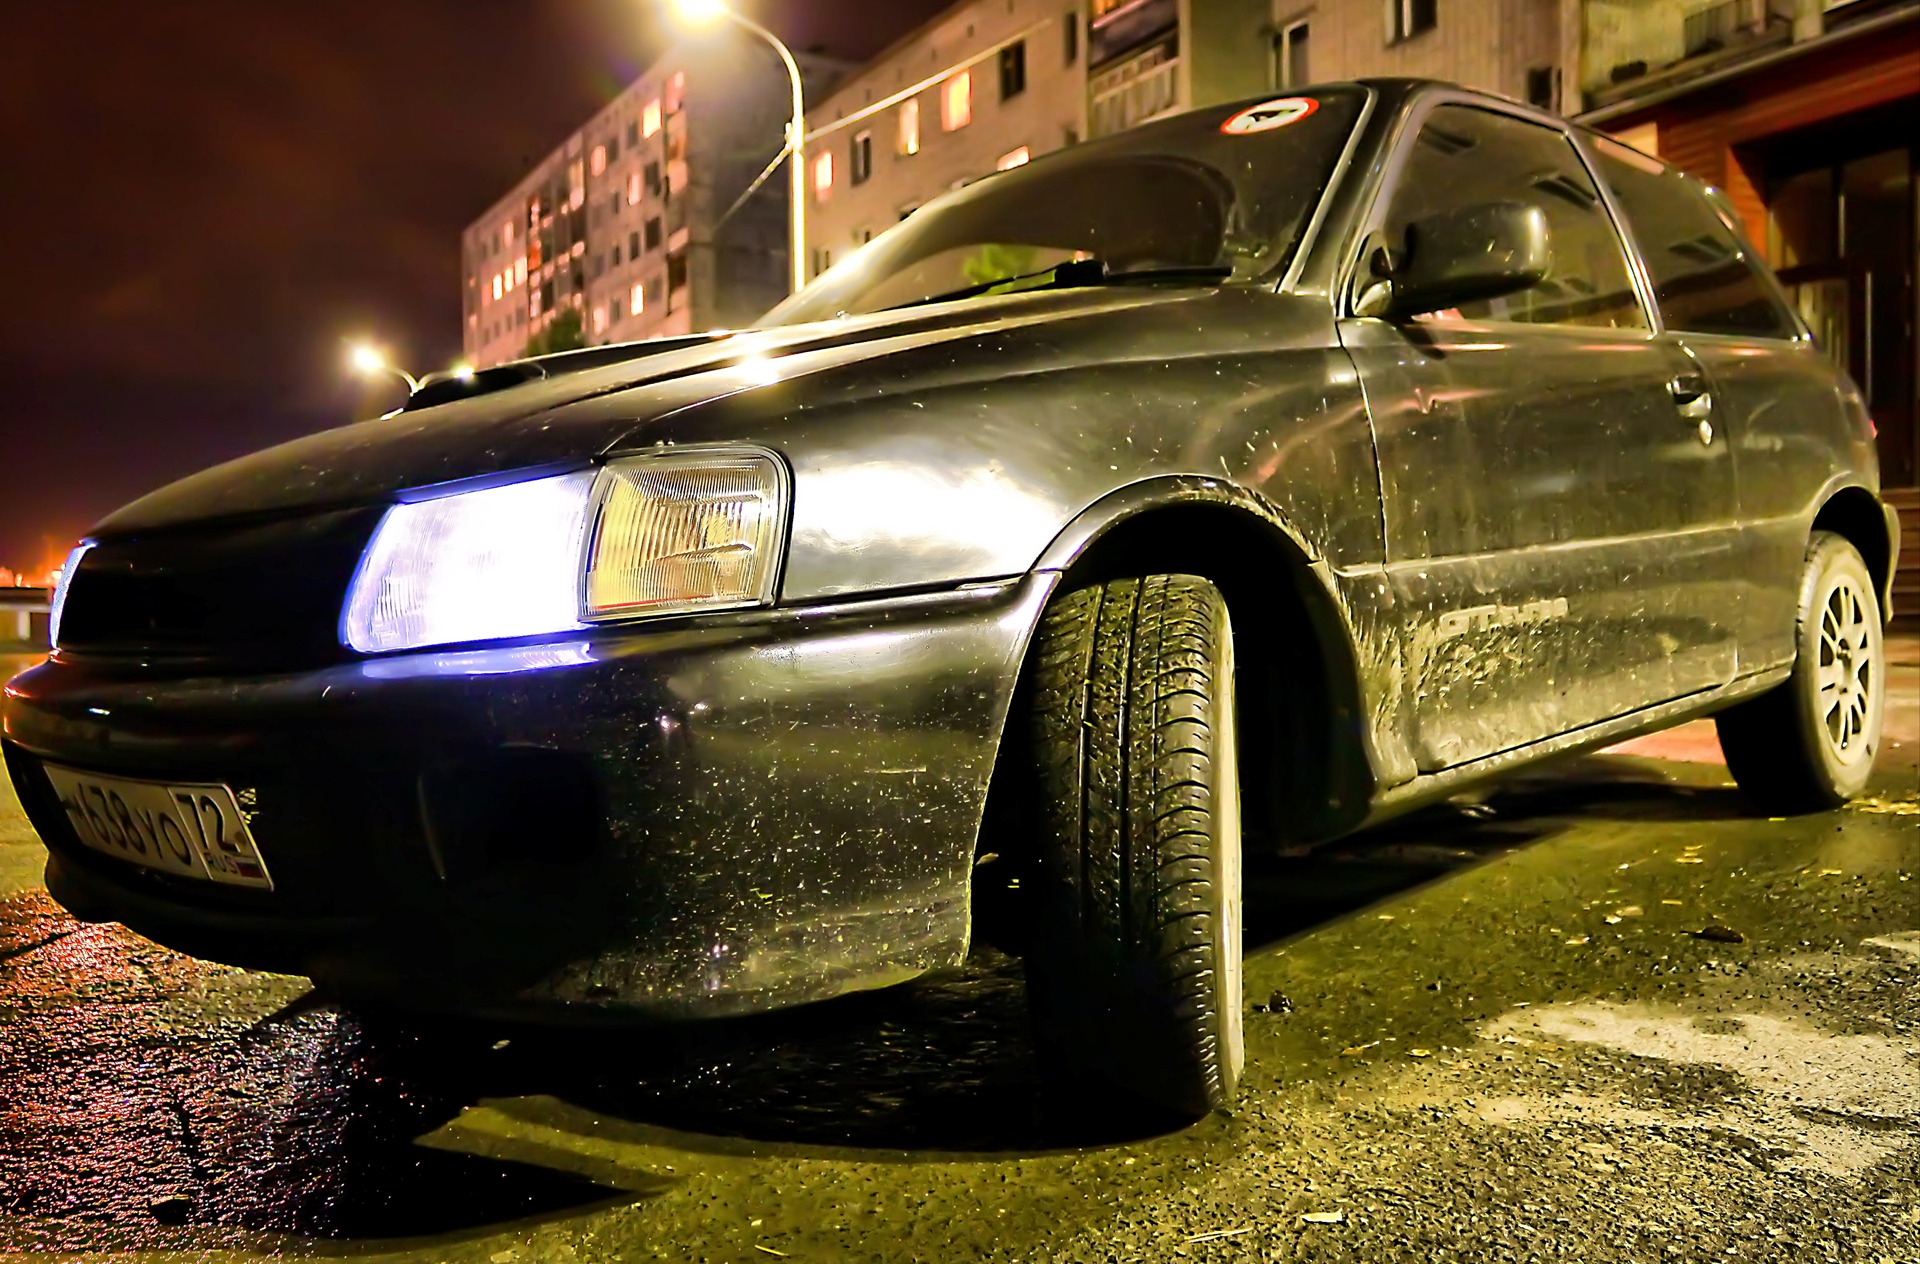     Canon 50D Toyota Starlet 13 1992